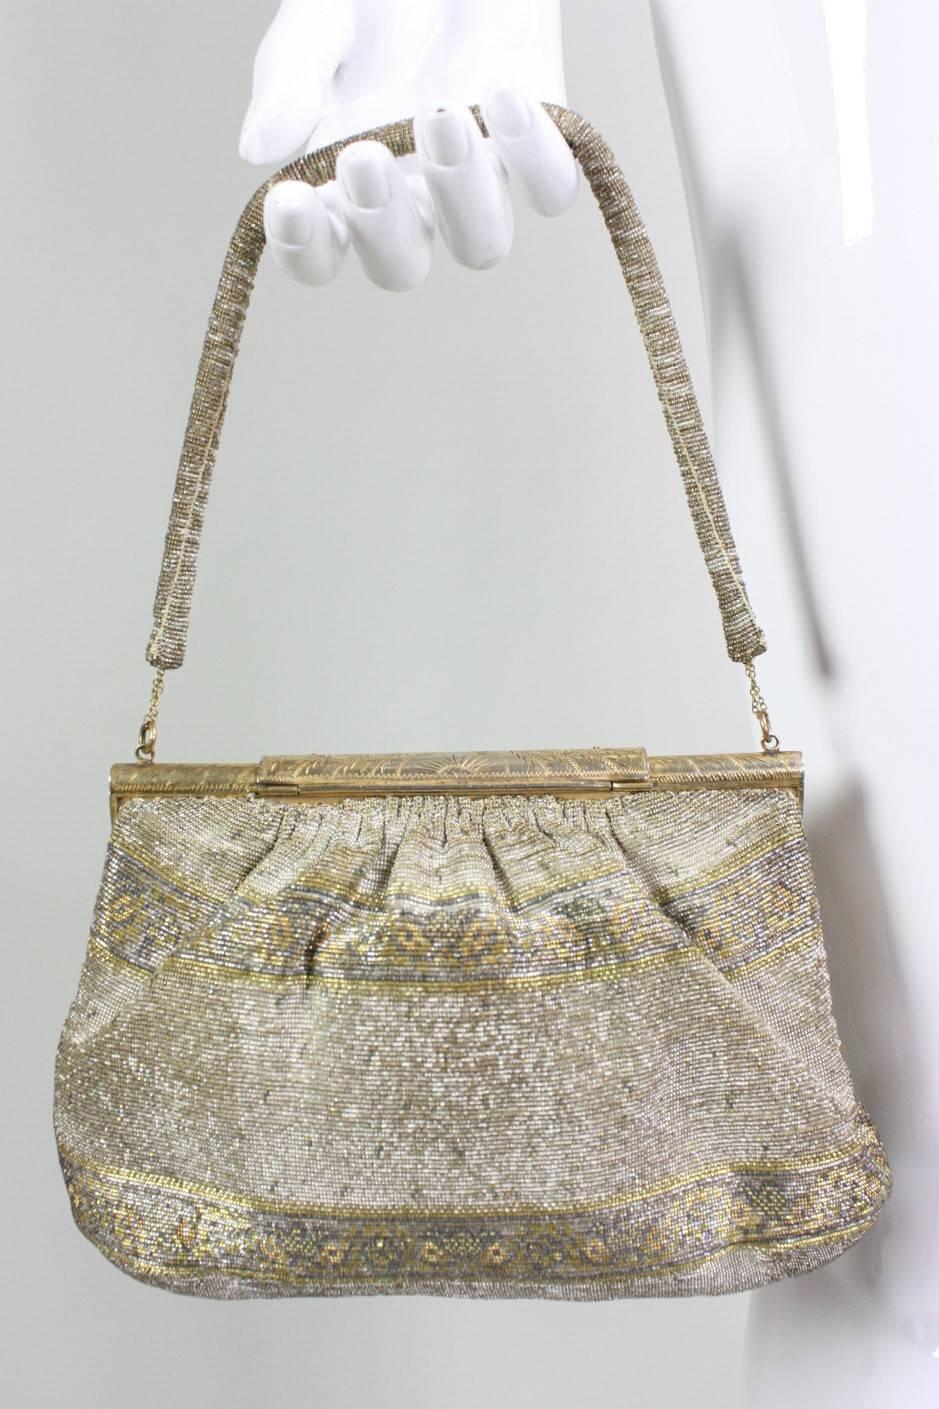 "Hand made in France".  Etched gold-toned frame and clasp with marcasite.   Tan satin lining with side pockets.

Measurements-

Top Width: 7 1/4"
Bottom Width: 9"
Height: 6 1/4"
Strap Drop: 5 3/4"